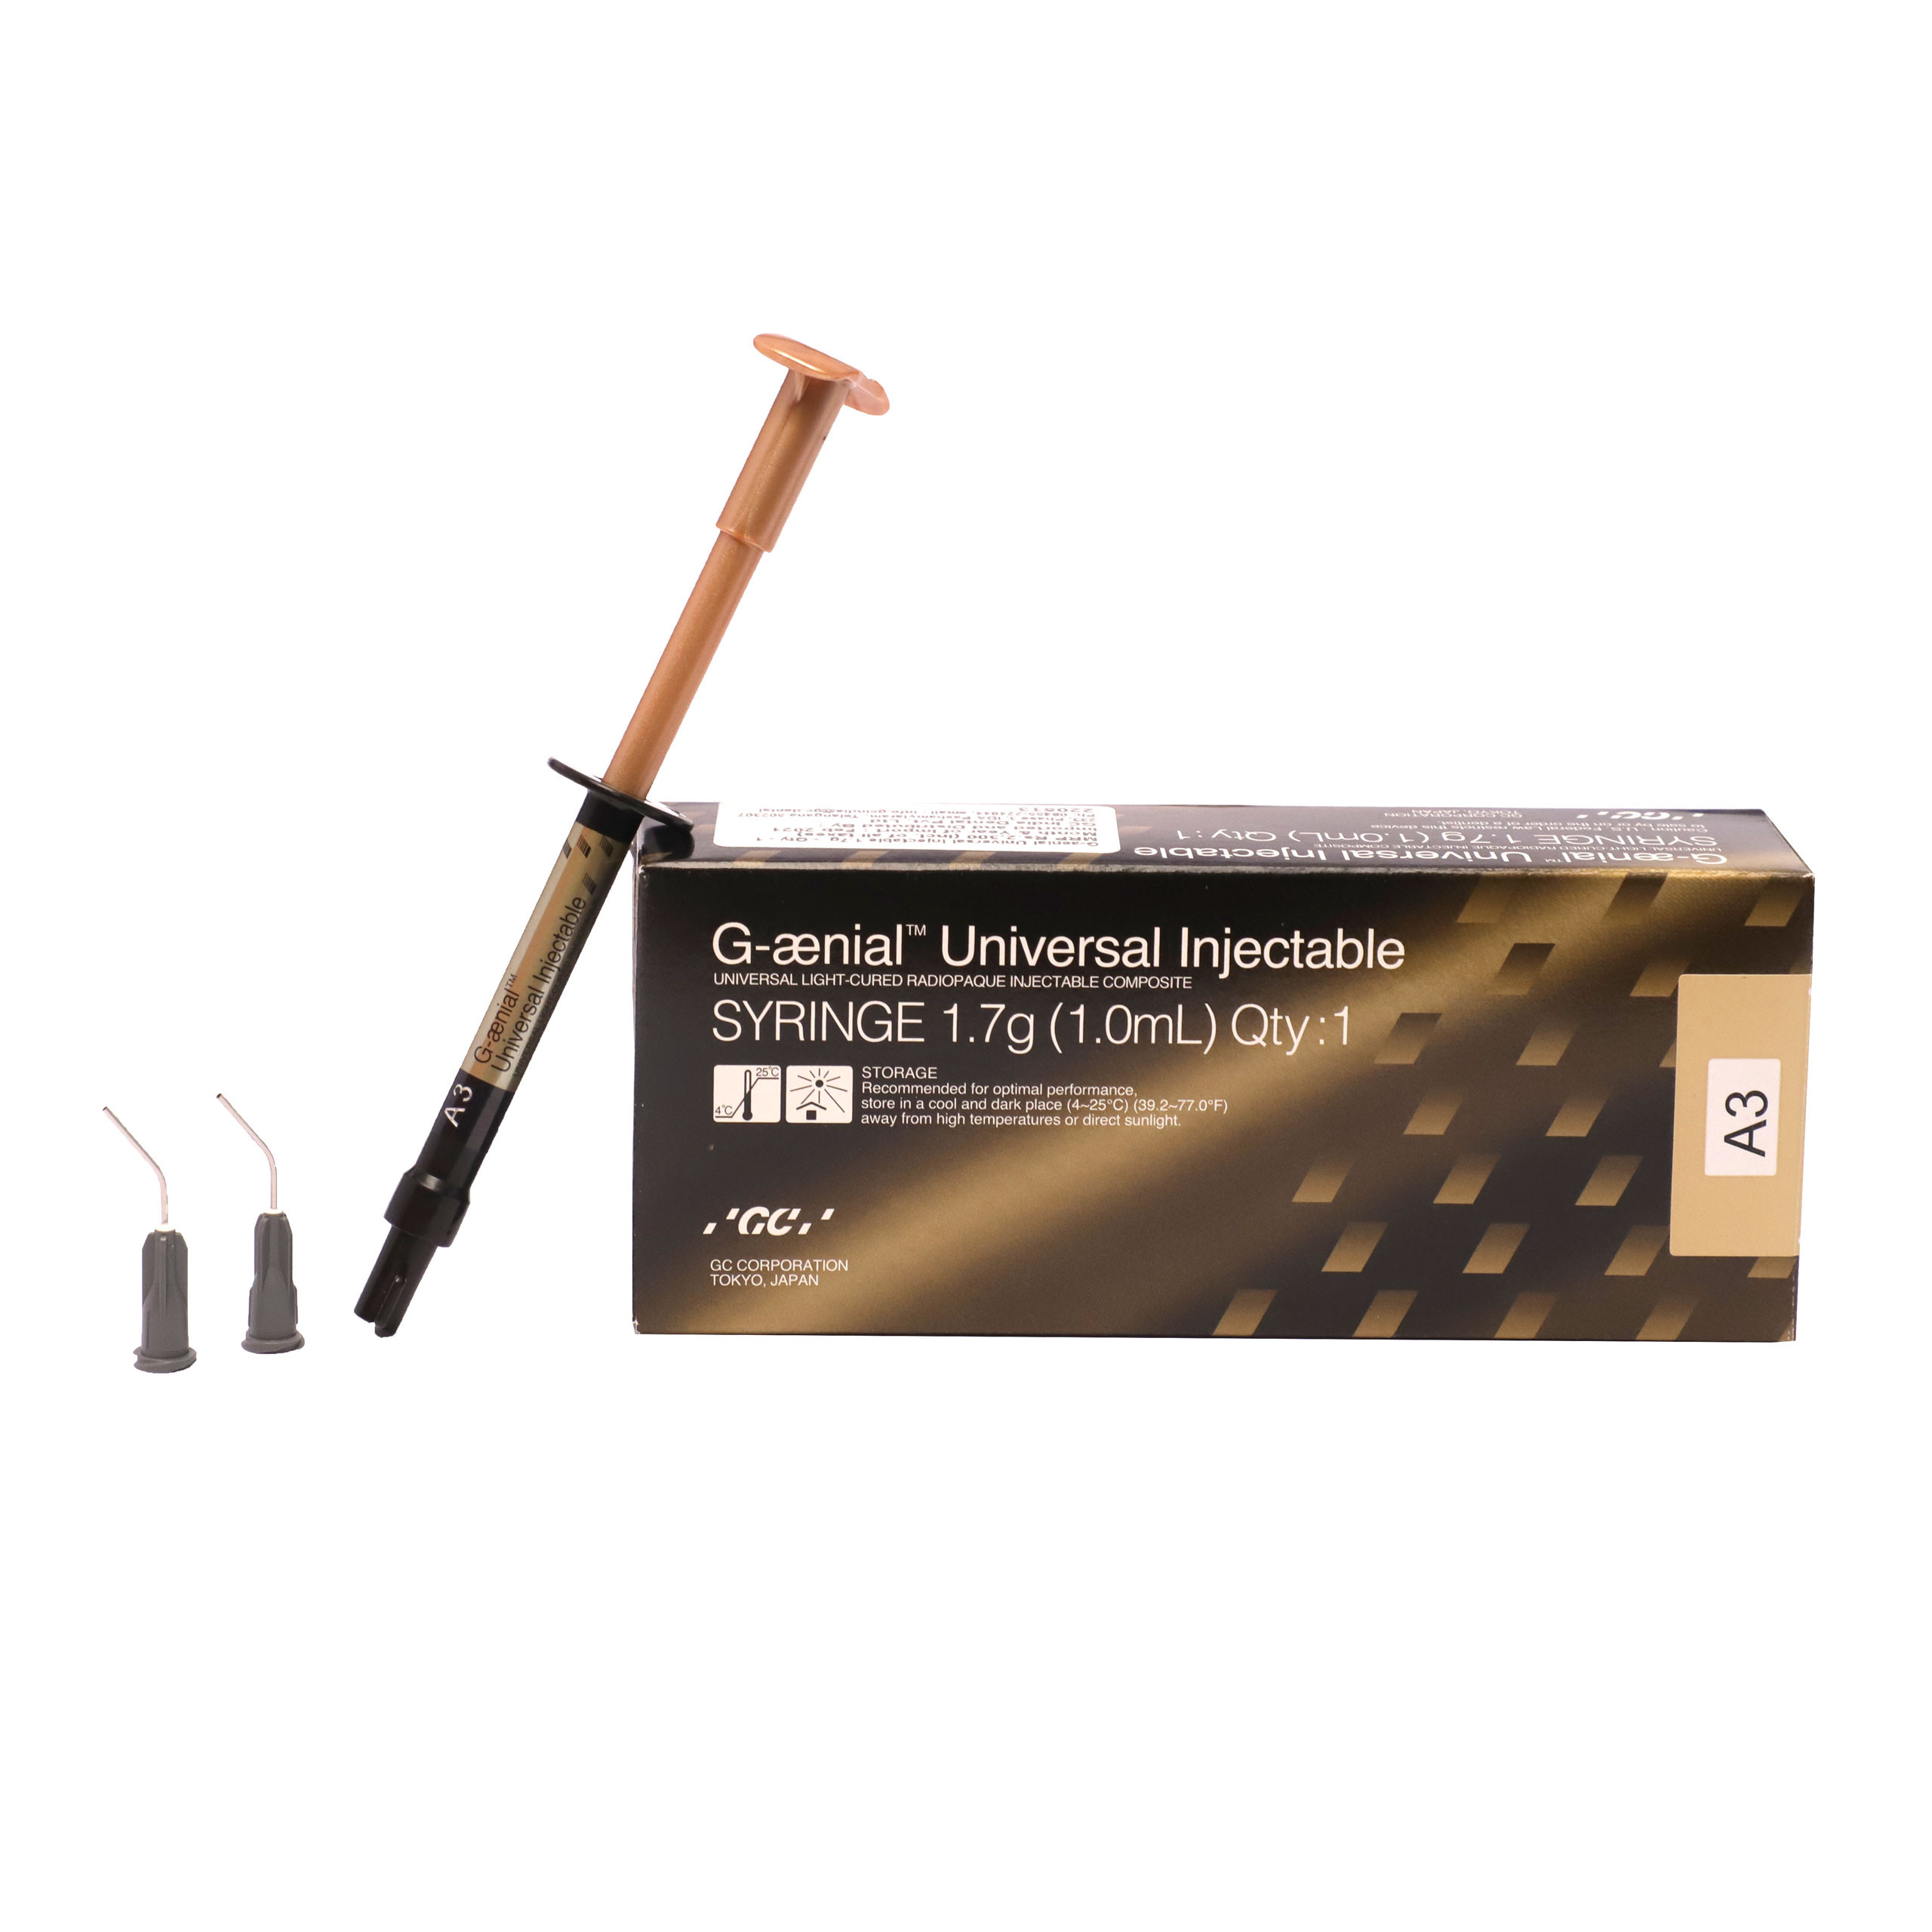 G-aenial Universal Injectable A-3